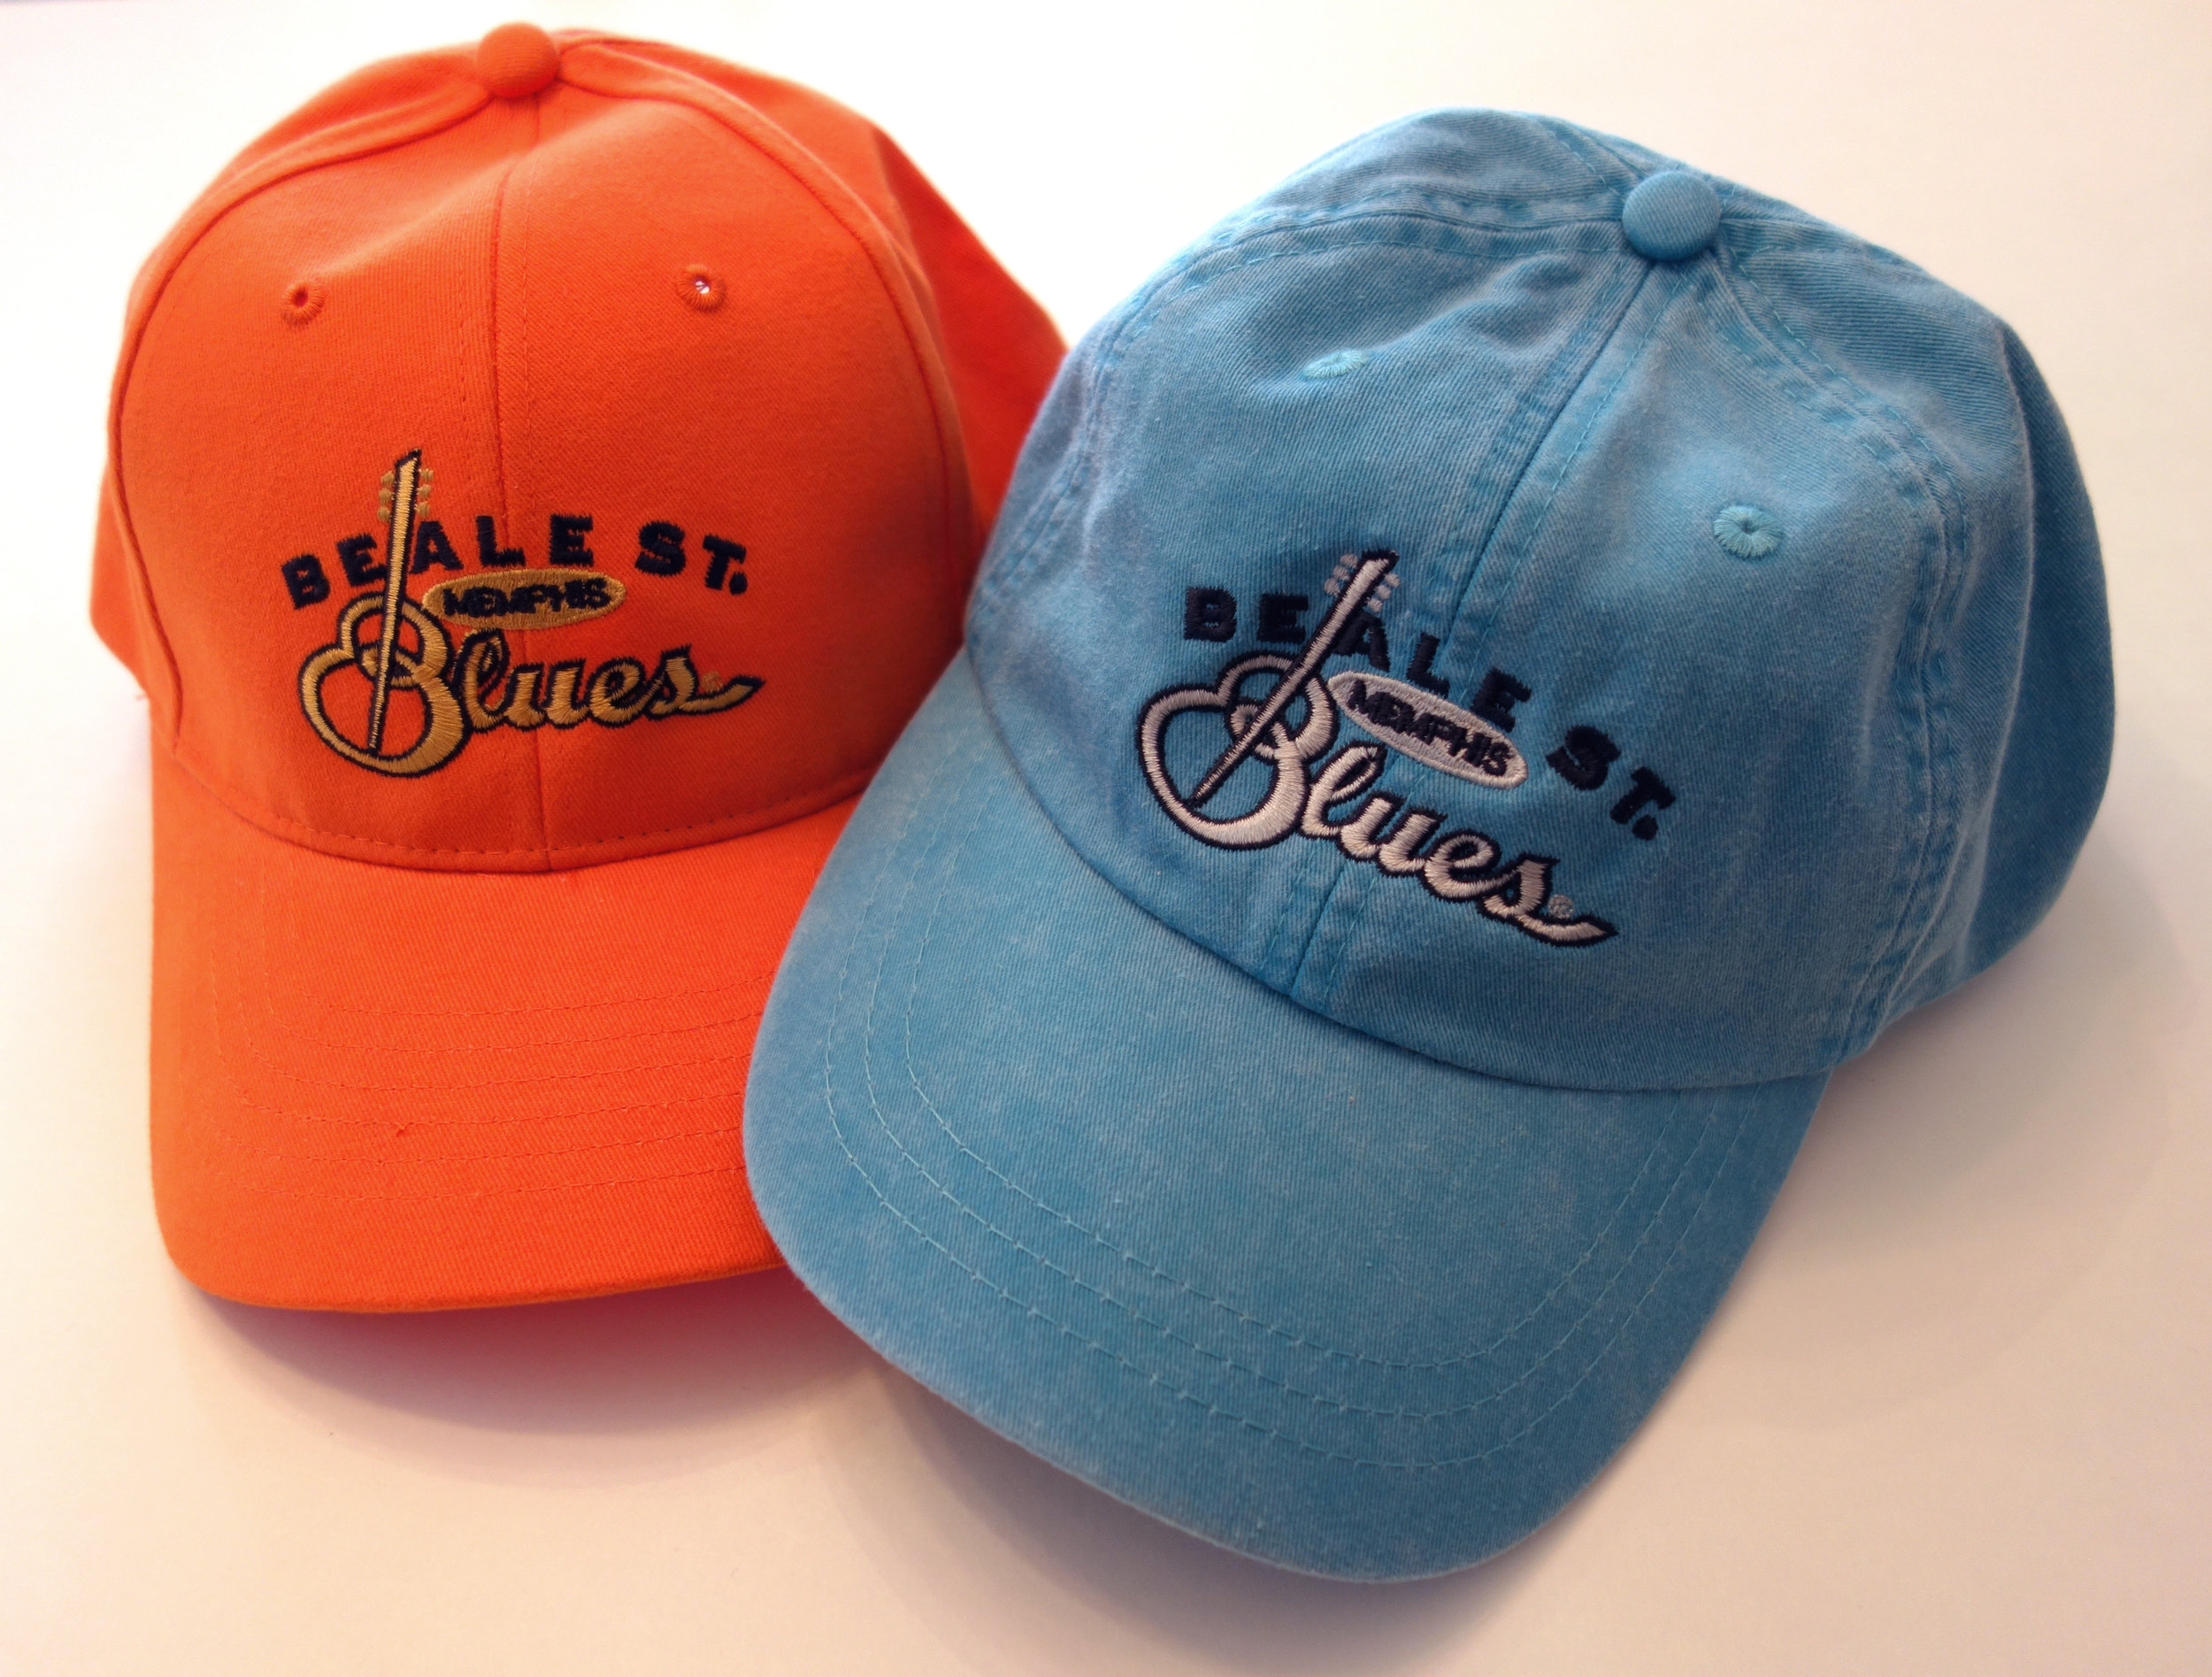  Beale Street Blues logo cap  © Chuck Mitchell. All rights reserved. 